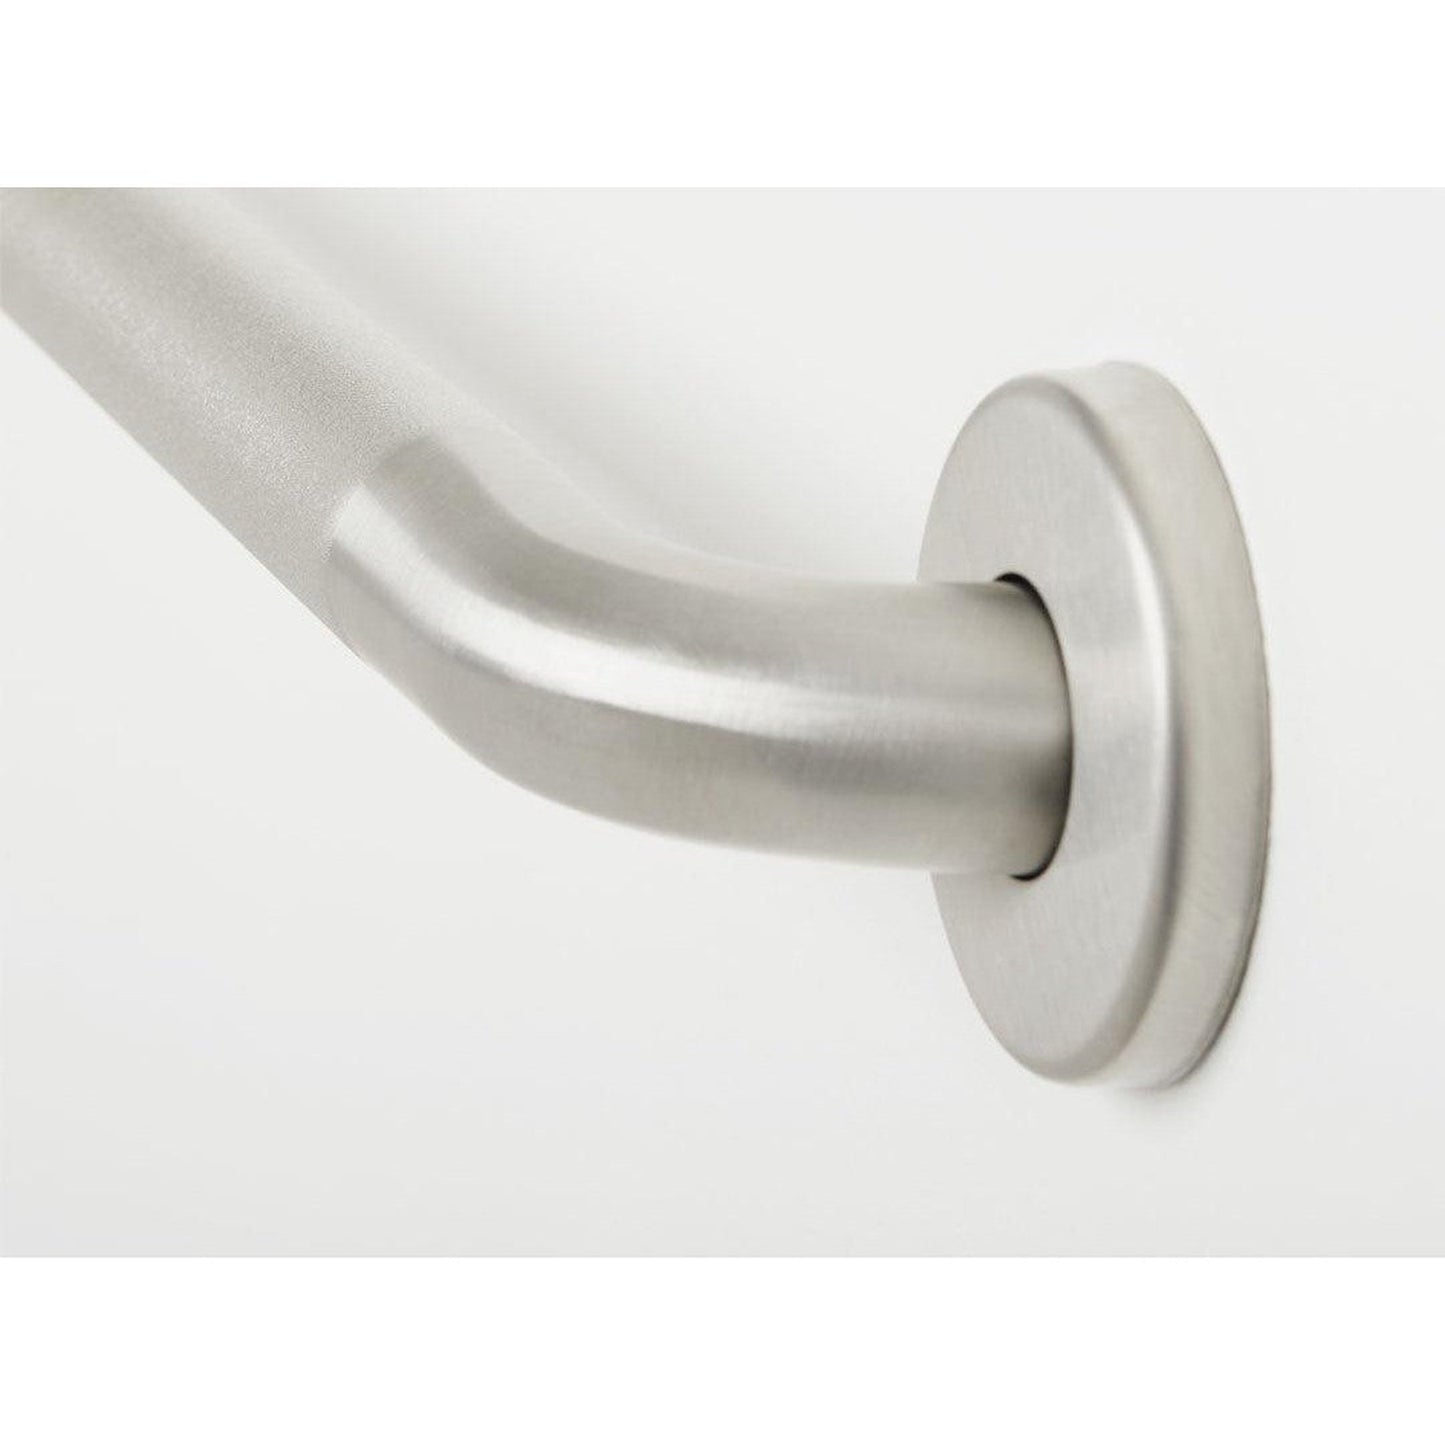 Seachrome Signature Series Value Line 24" Peened Stainless Steel With Satin Ends 1.5" Tube Diameter Straight Concealed Flange Grab Bar